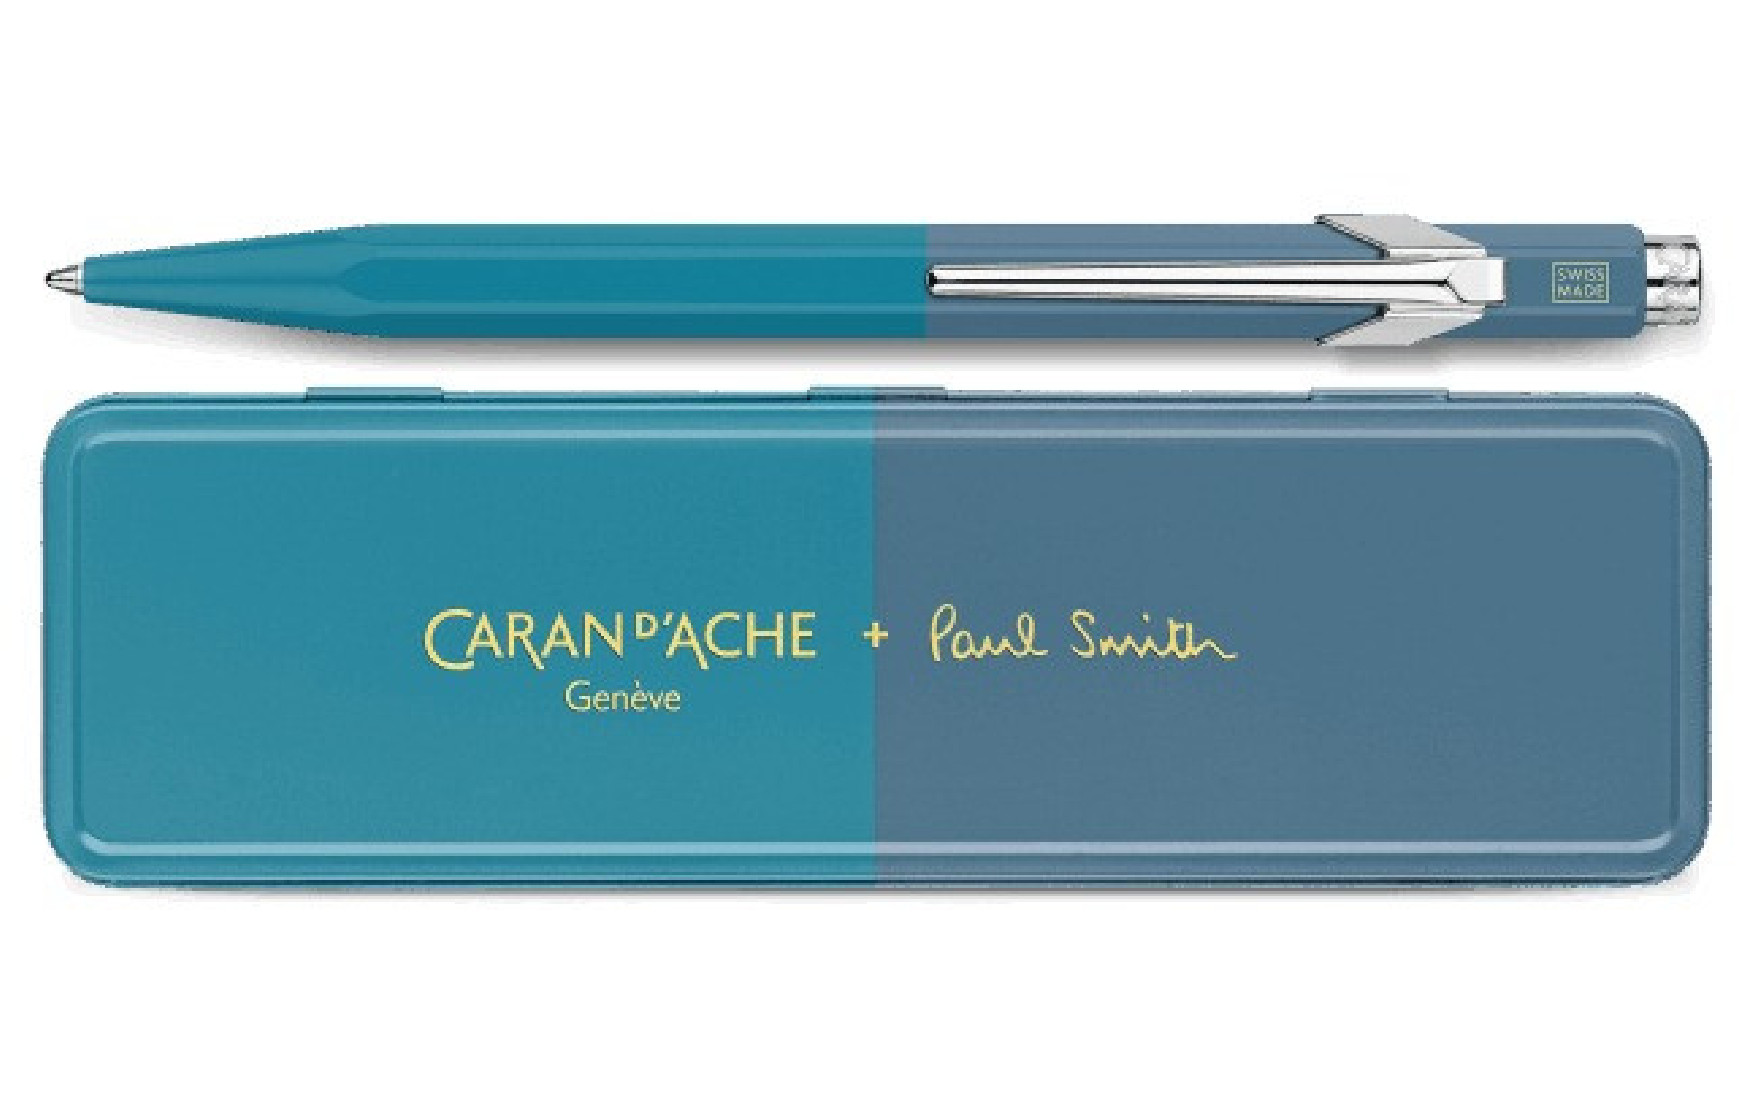 CARAN DACHE 849 Paul Smith Cyan Blue and Steel Blue ballpoint pen, with holder